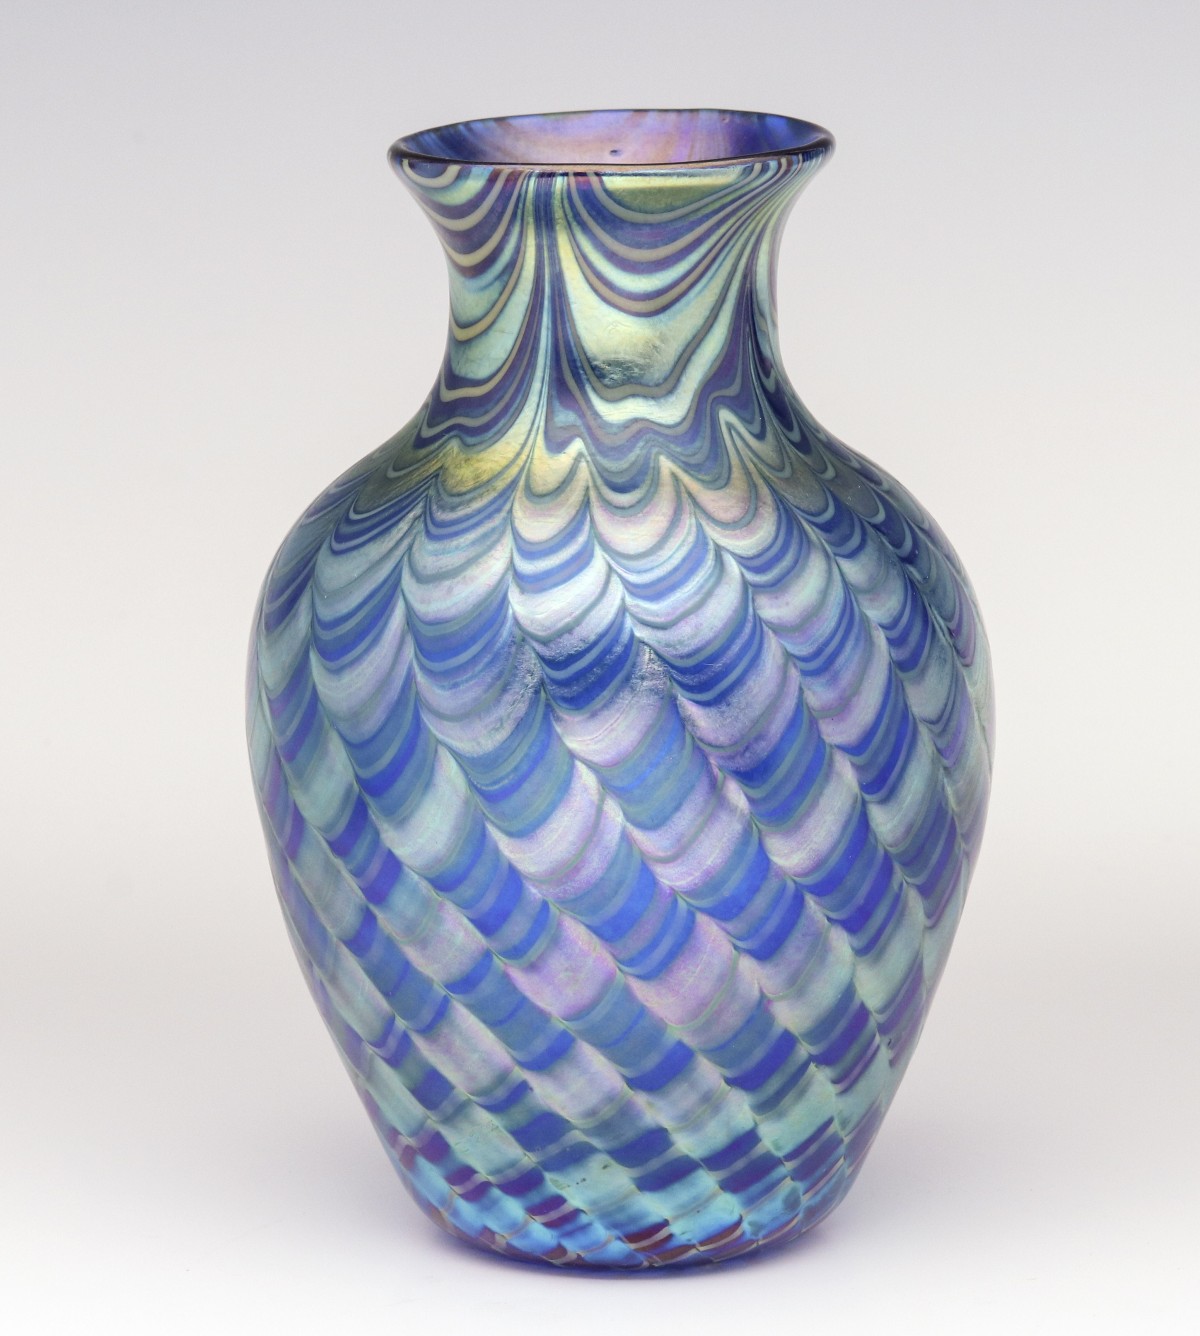 AN ORIENT AND FLUME ART GLASS VASE WITH UNUSUAL FINISH